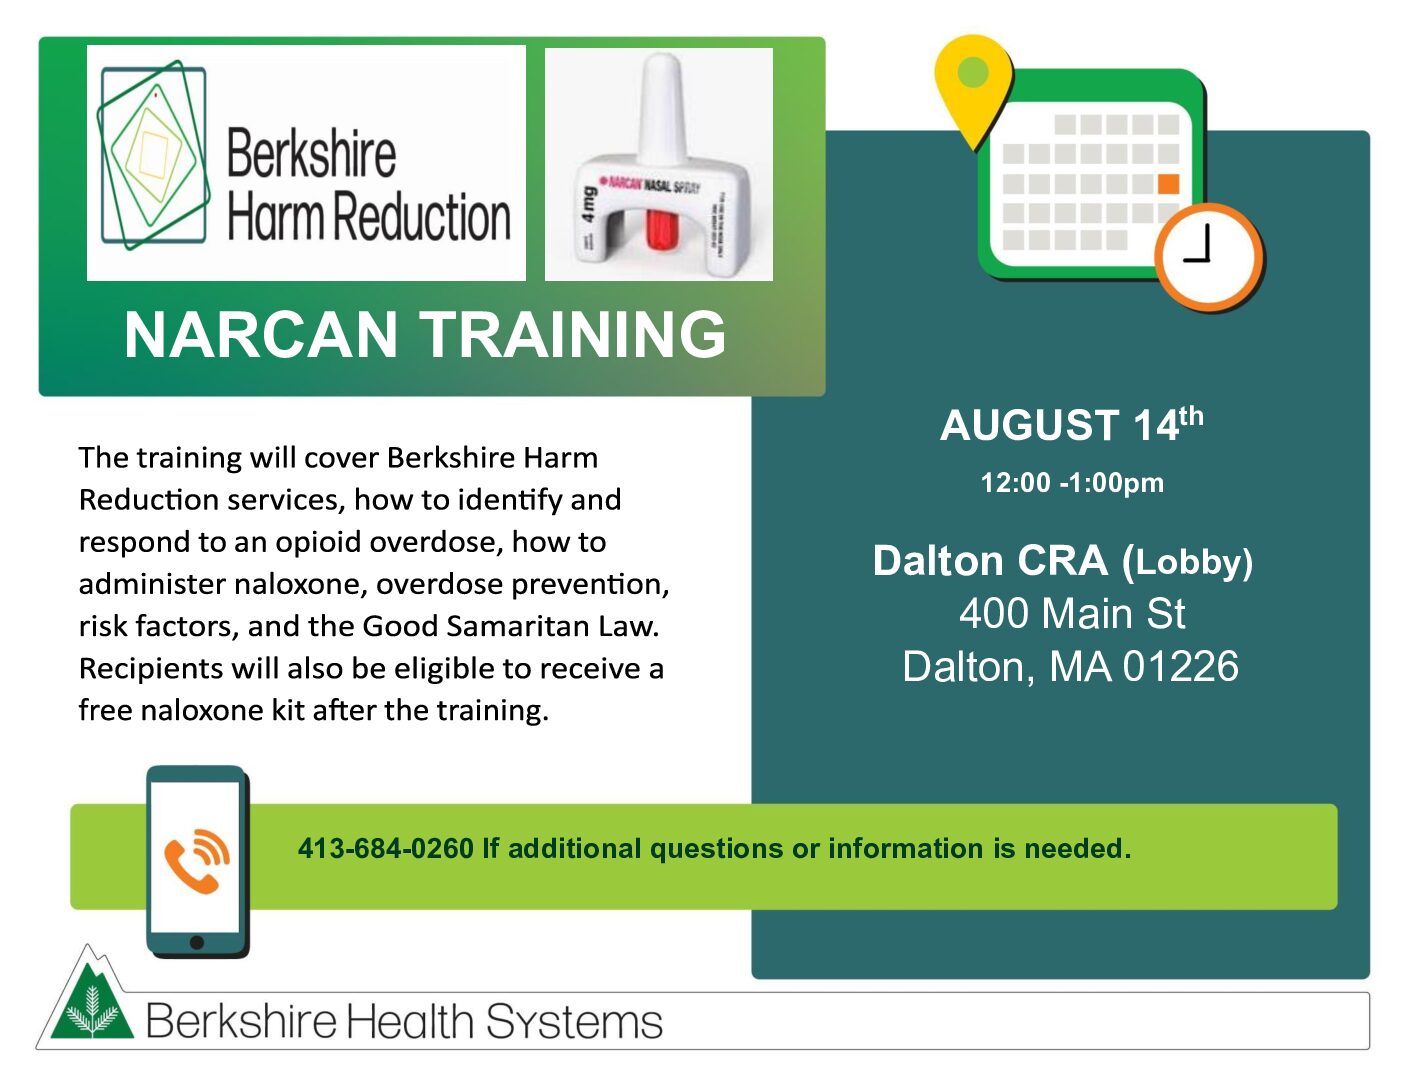 Narcan Training August 14th